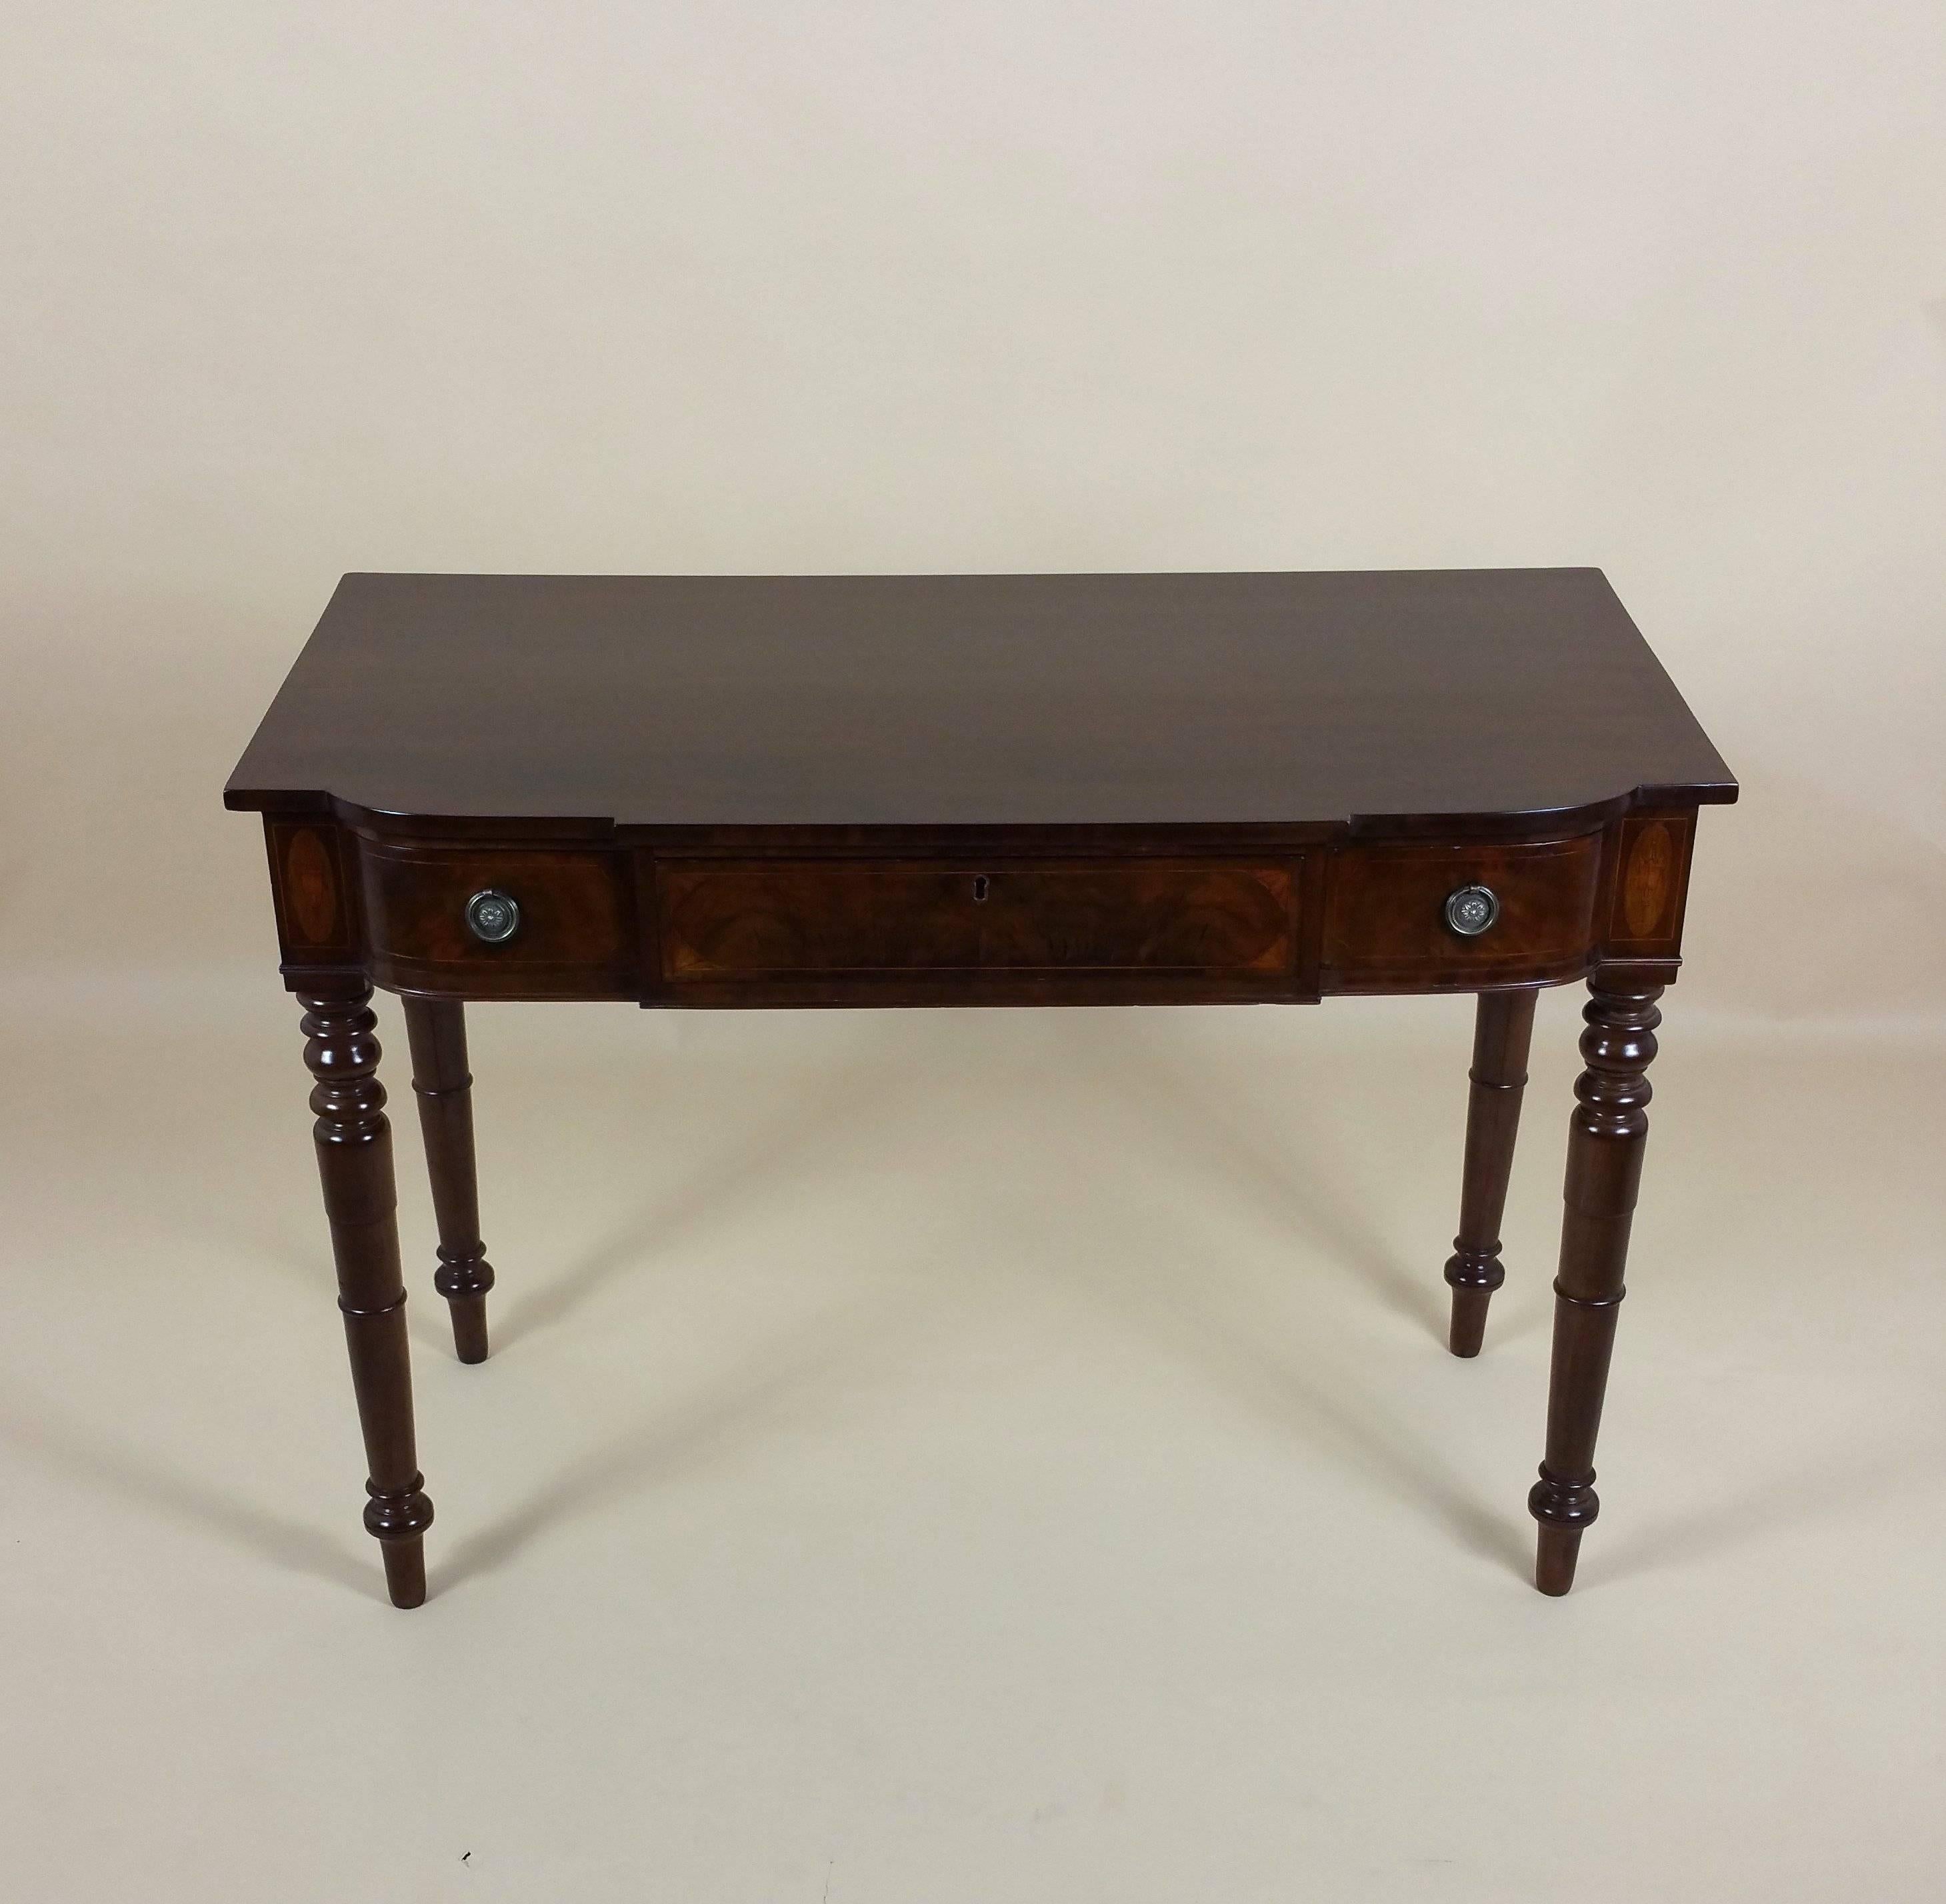 This handsome and well-proportioned George III inlaid mahogany breakfront side table features a large central drawer with a smaller curved drawer on either side, finished with brass pull rings. The side table is decorated with an inlaid design of